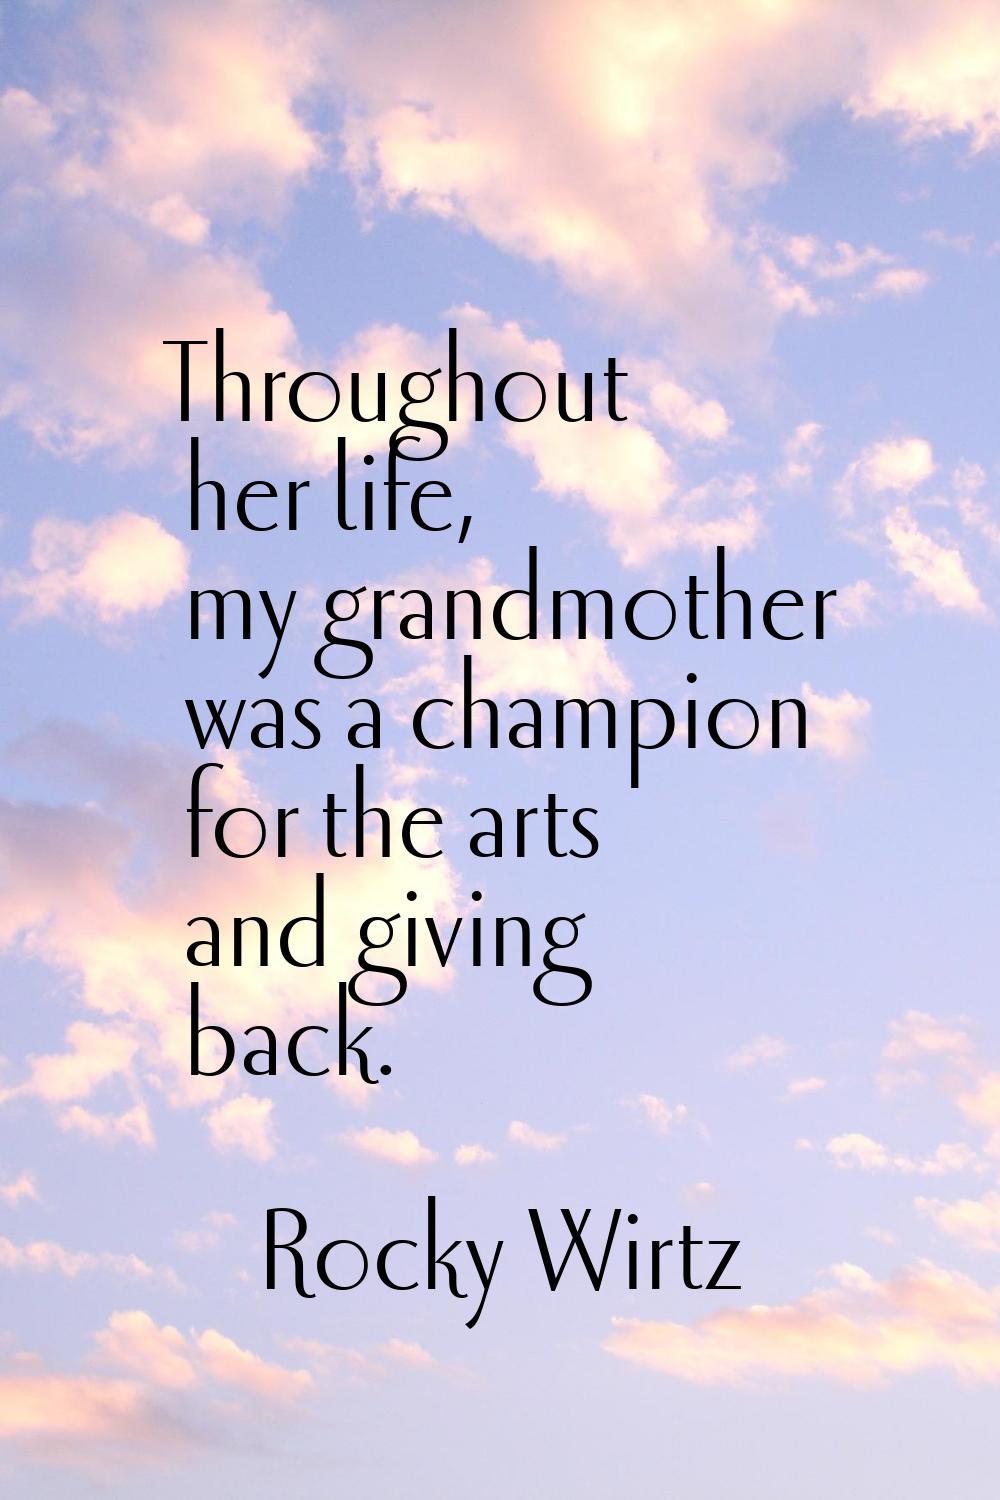 Throughout her life, my grandmother was a champion for the arts and giving back.